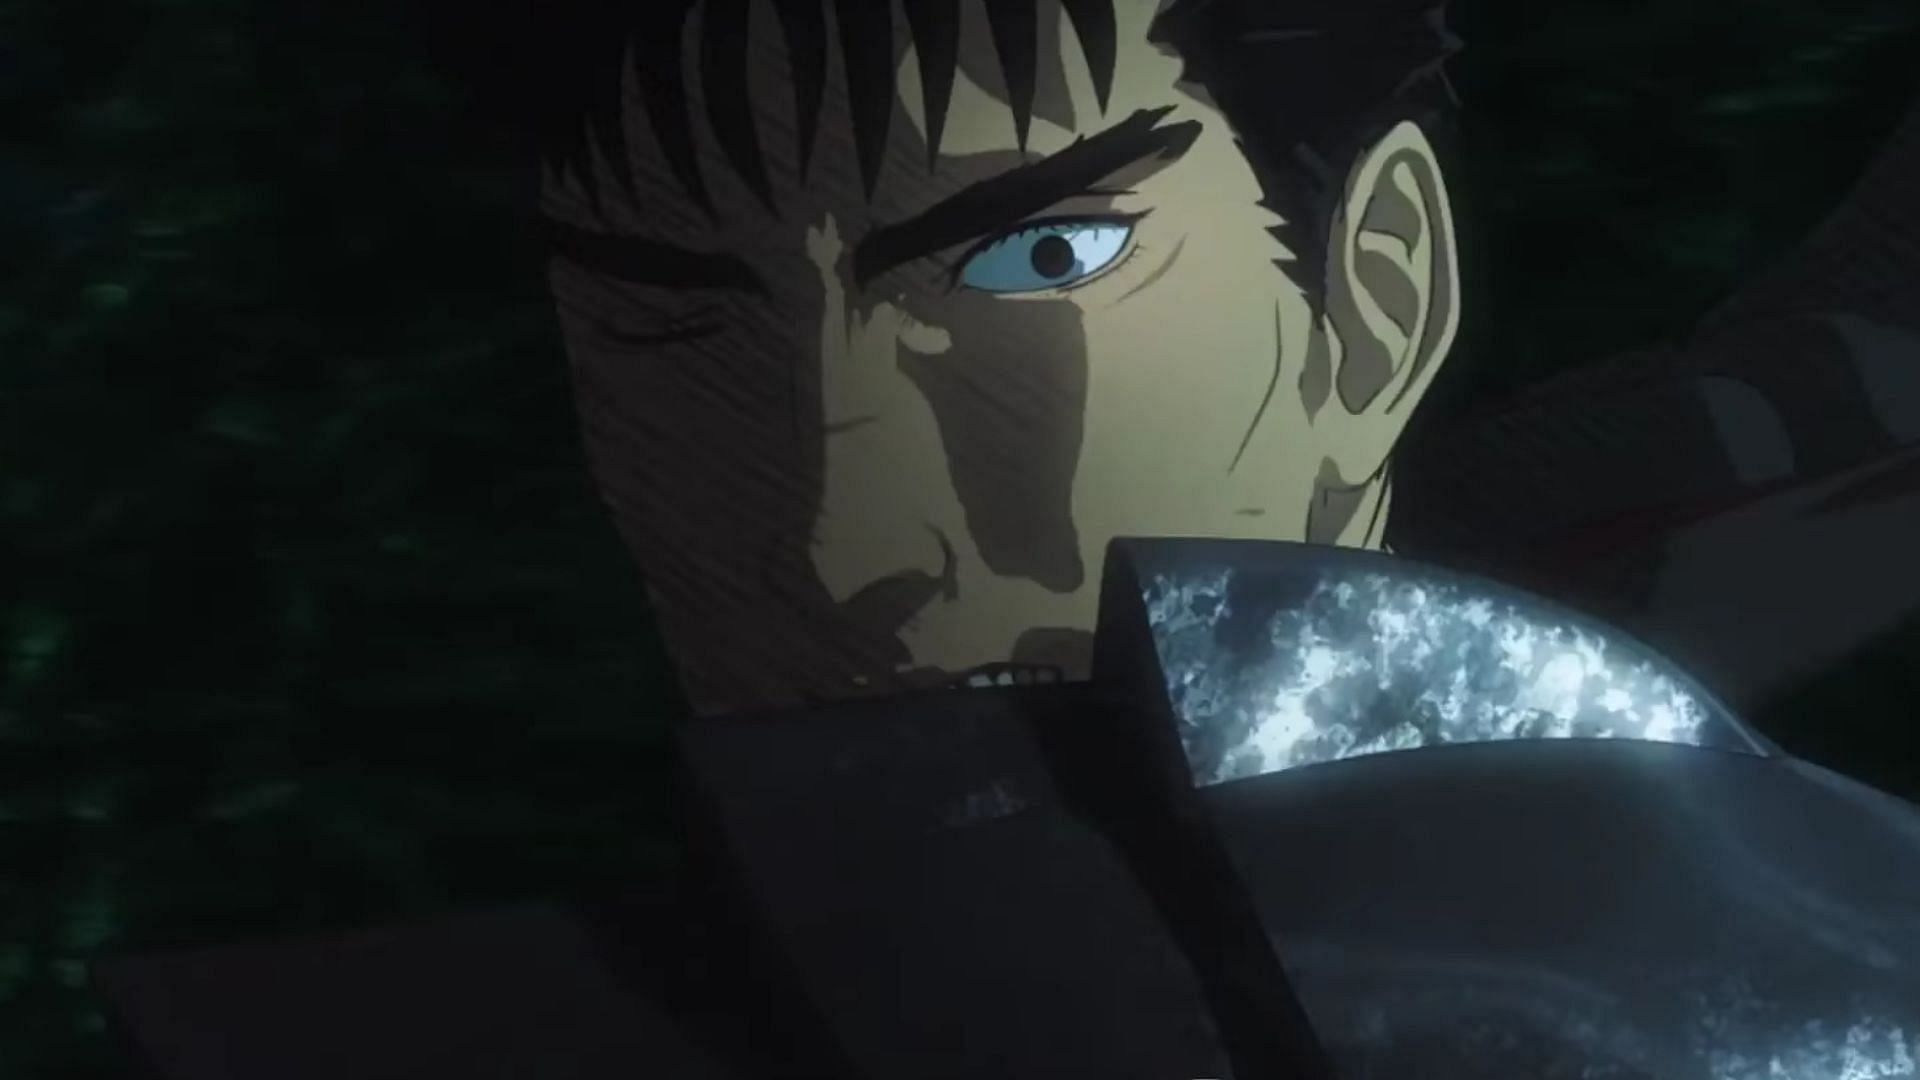 25 years ago today, Berserk's first and greatest anime adaptation